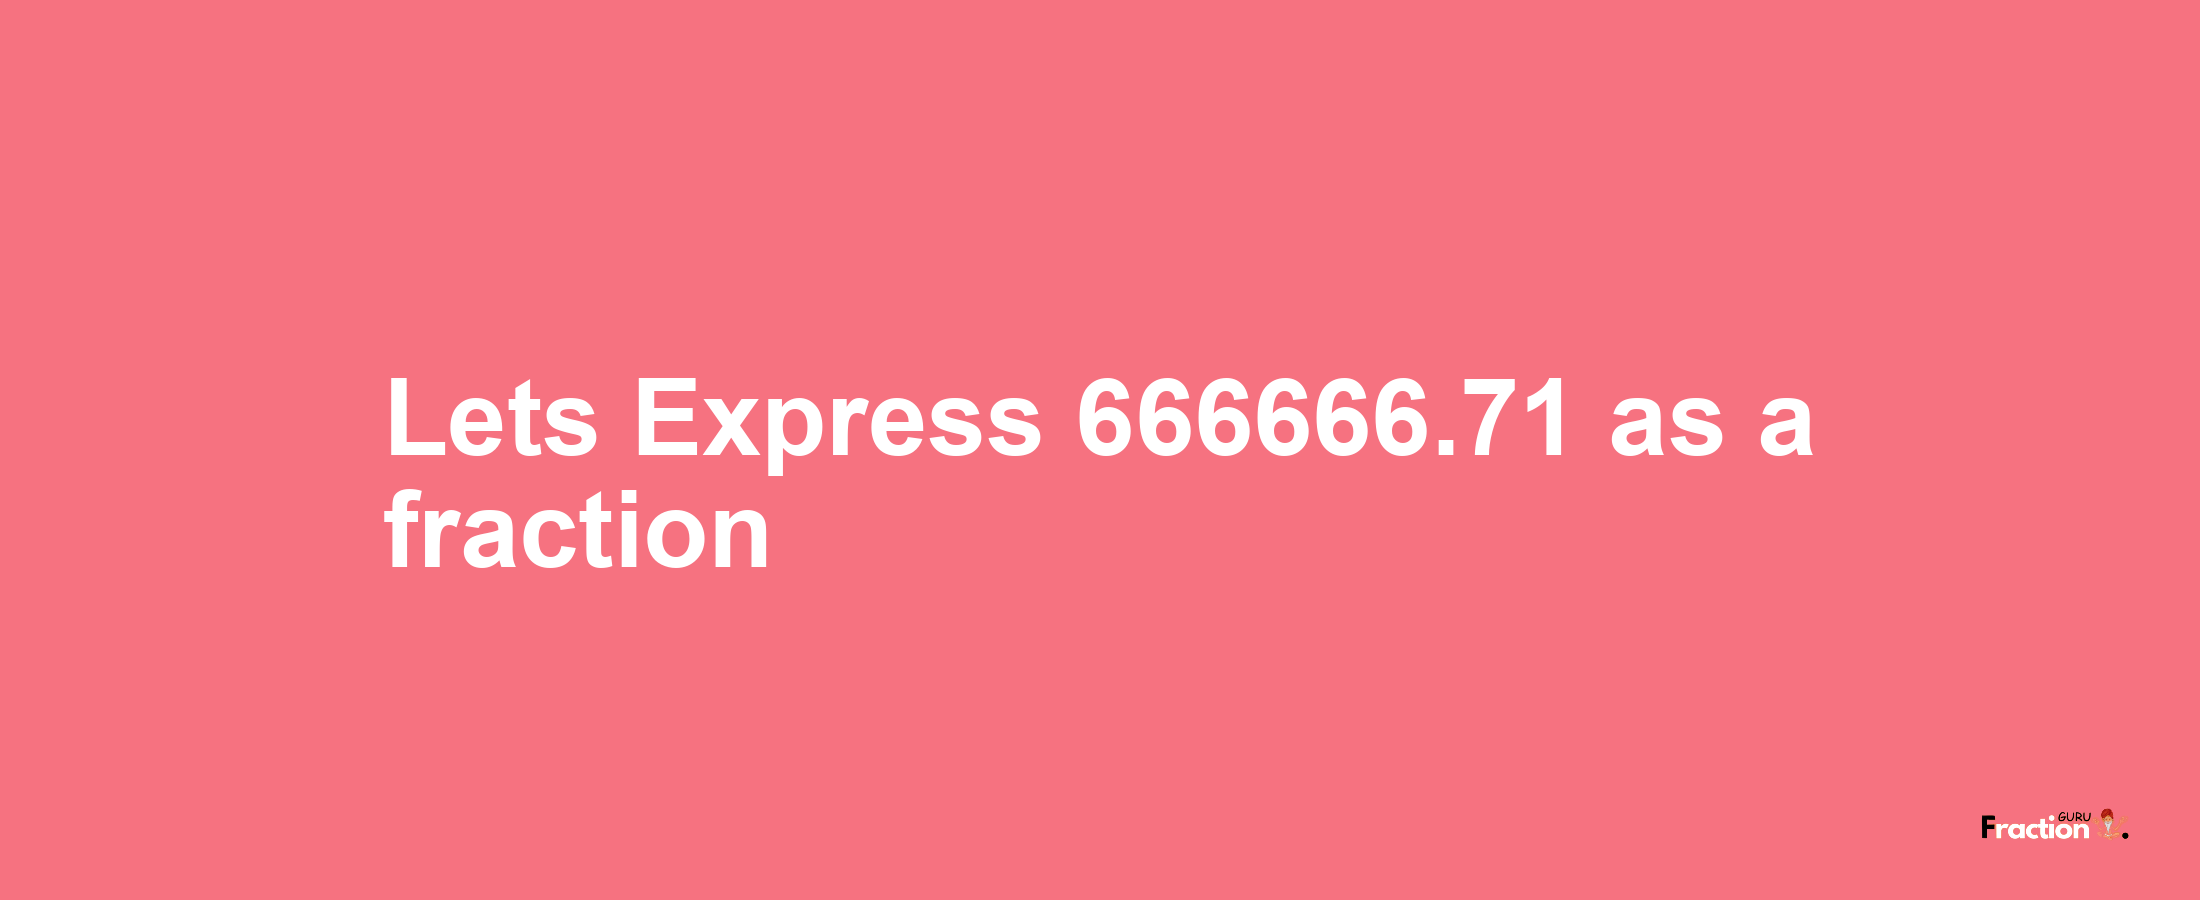 Lets Express 666666.71 as afraction